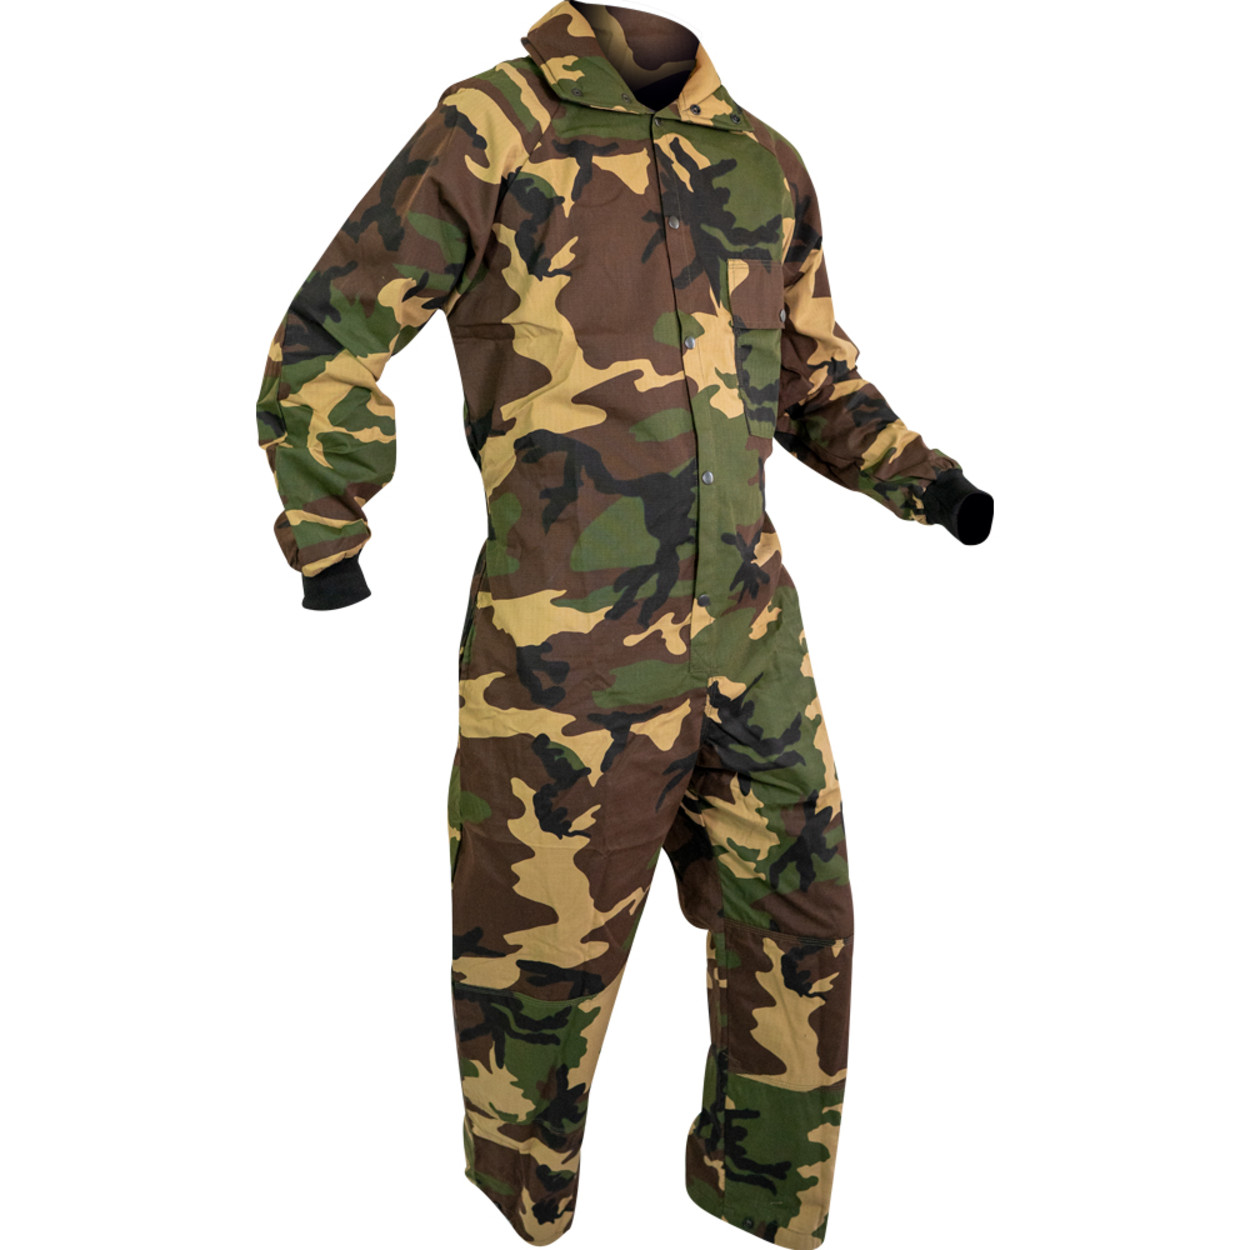 OVERALL CAMO (with neck protection)